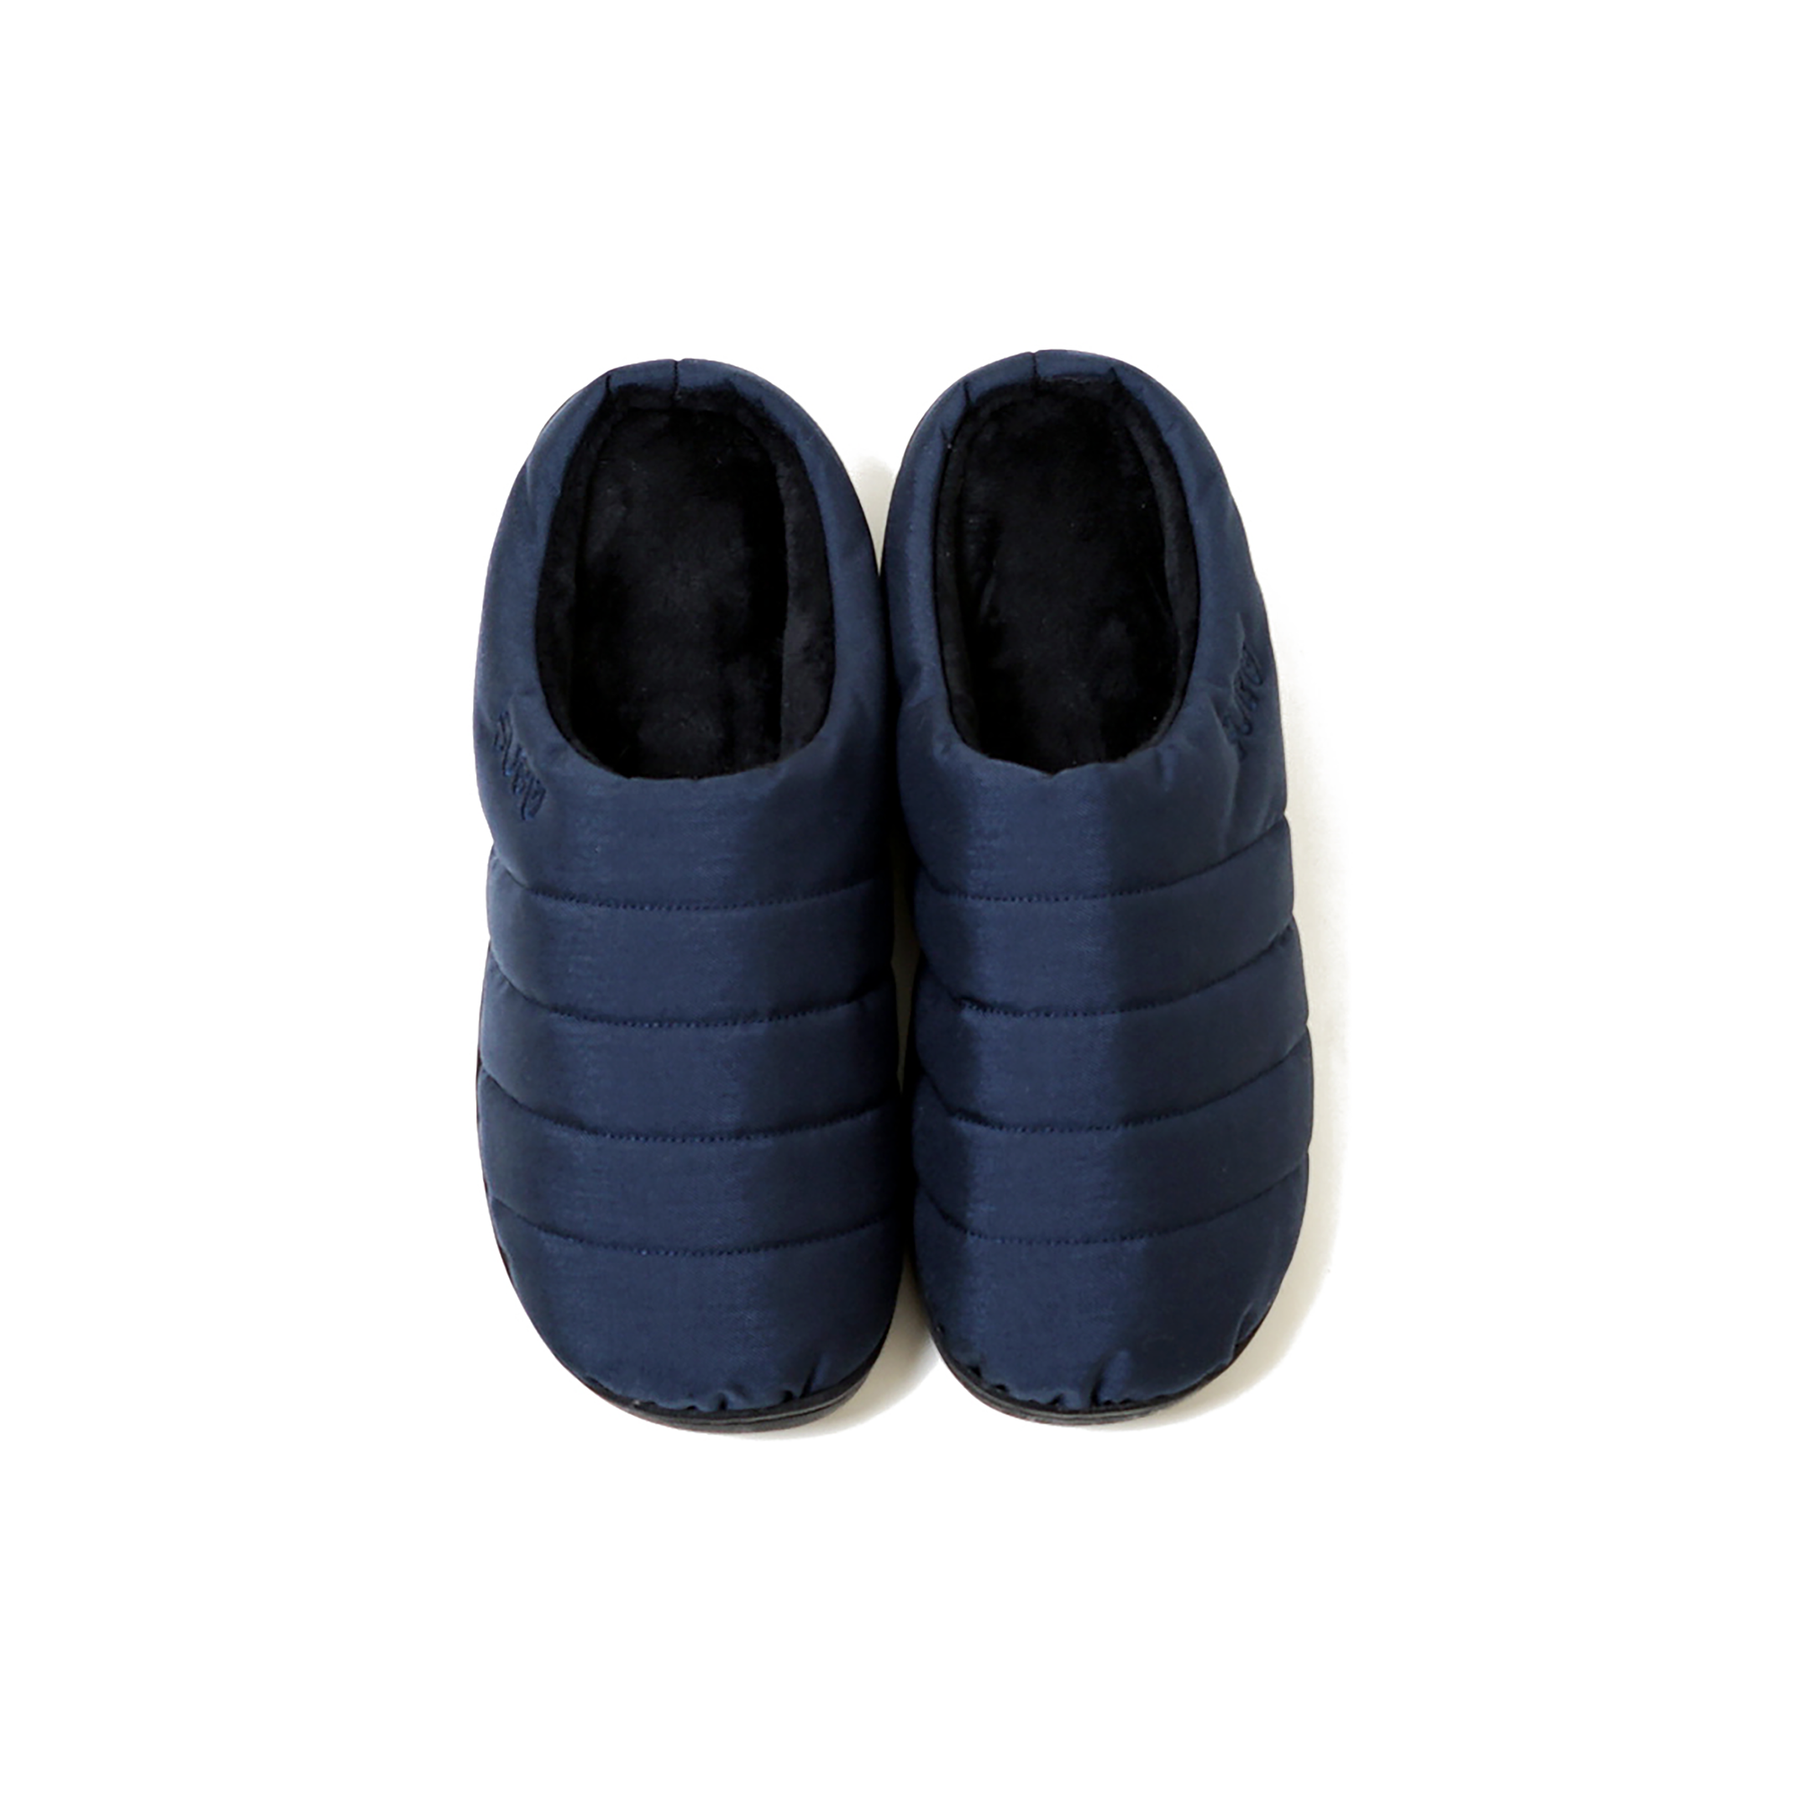 AMEICO - Official US Distributor of SUBU - Nannen Outdoor Slippers 